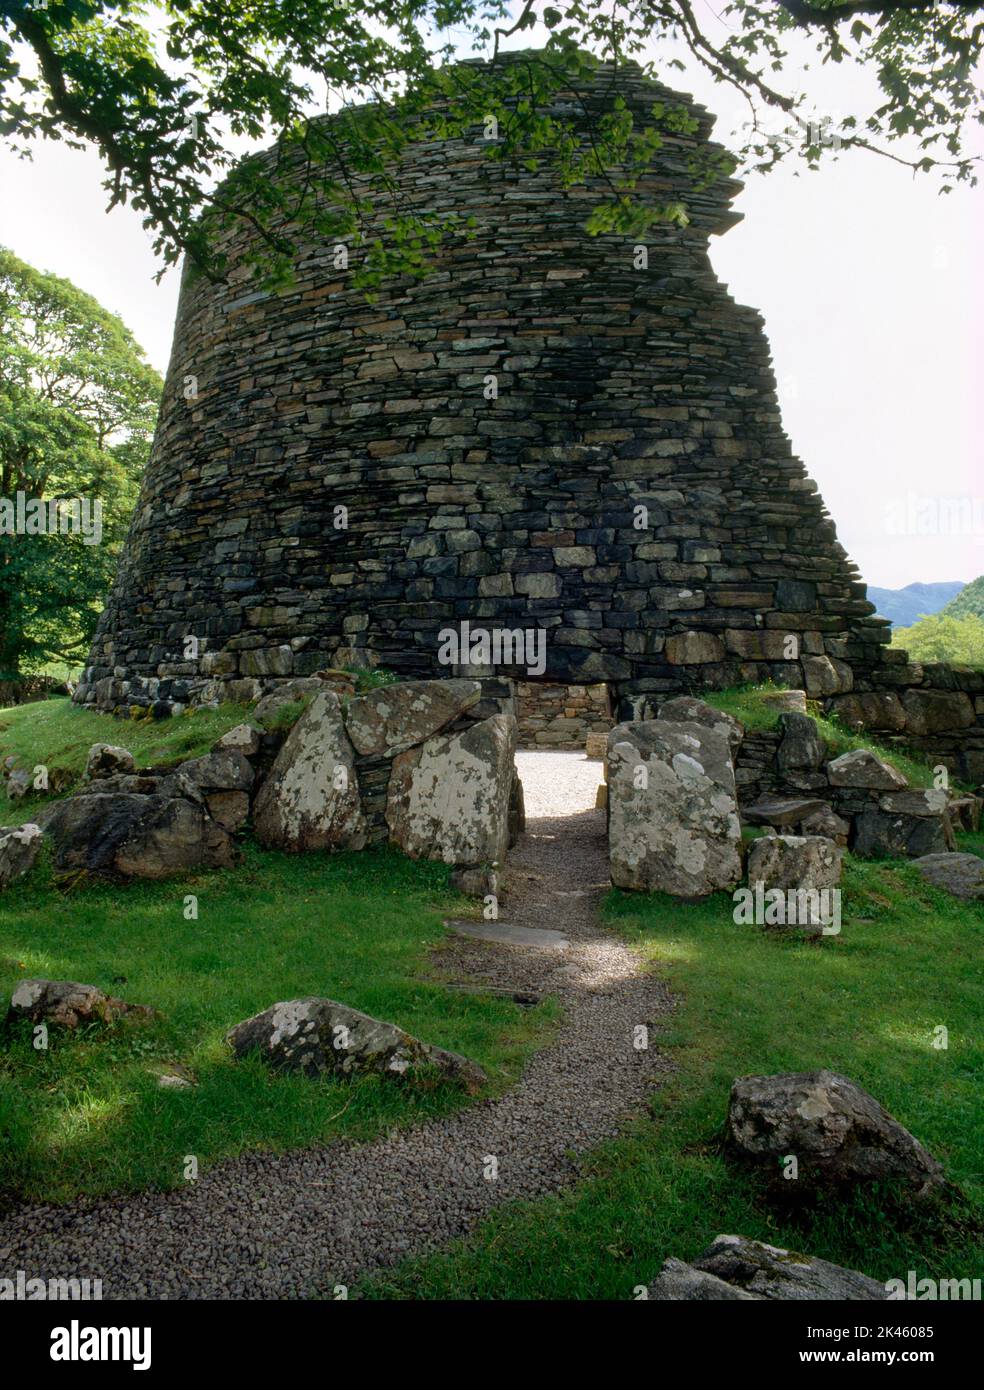 View E of Dun Telve Iron Age broch tower, Glenelg, Scotland, UK, showing the entrance passage & part of the wall still standing up to 10.1m high. Stock Photo